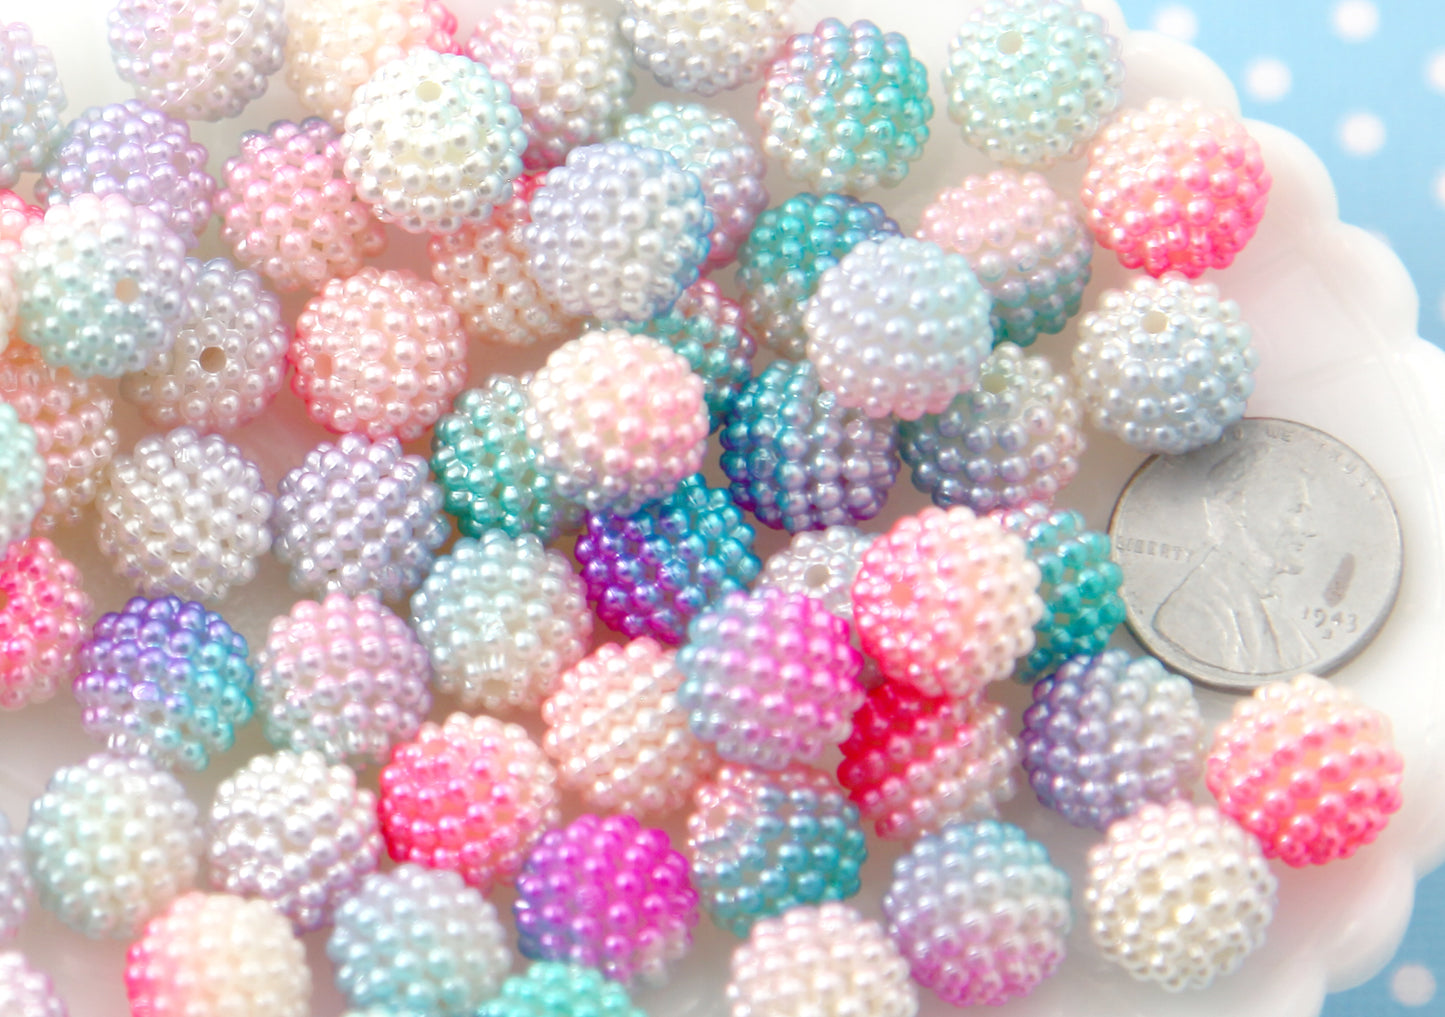 Berry Beads - 12mm Pastel Berry Beads Pearly Acrylic or Resin Beads - 50 pcs set